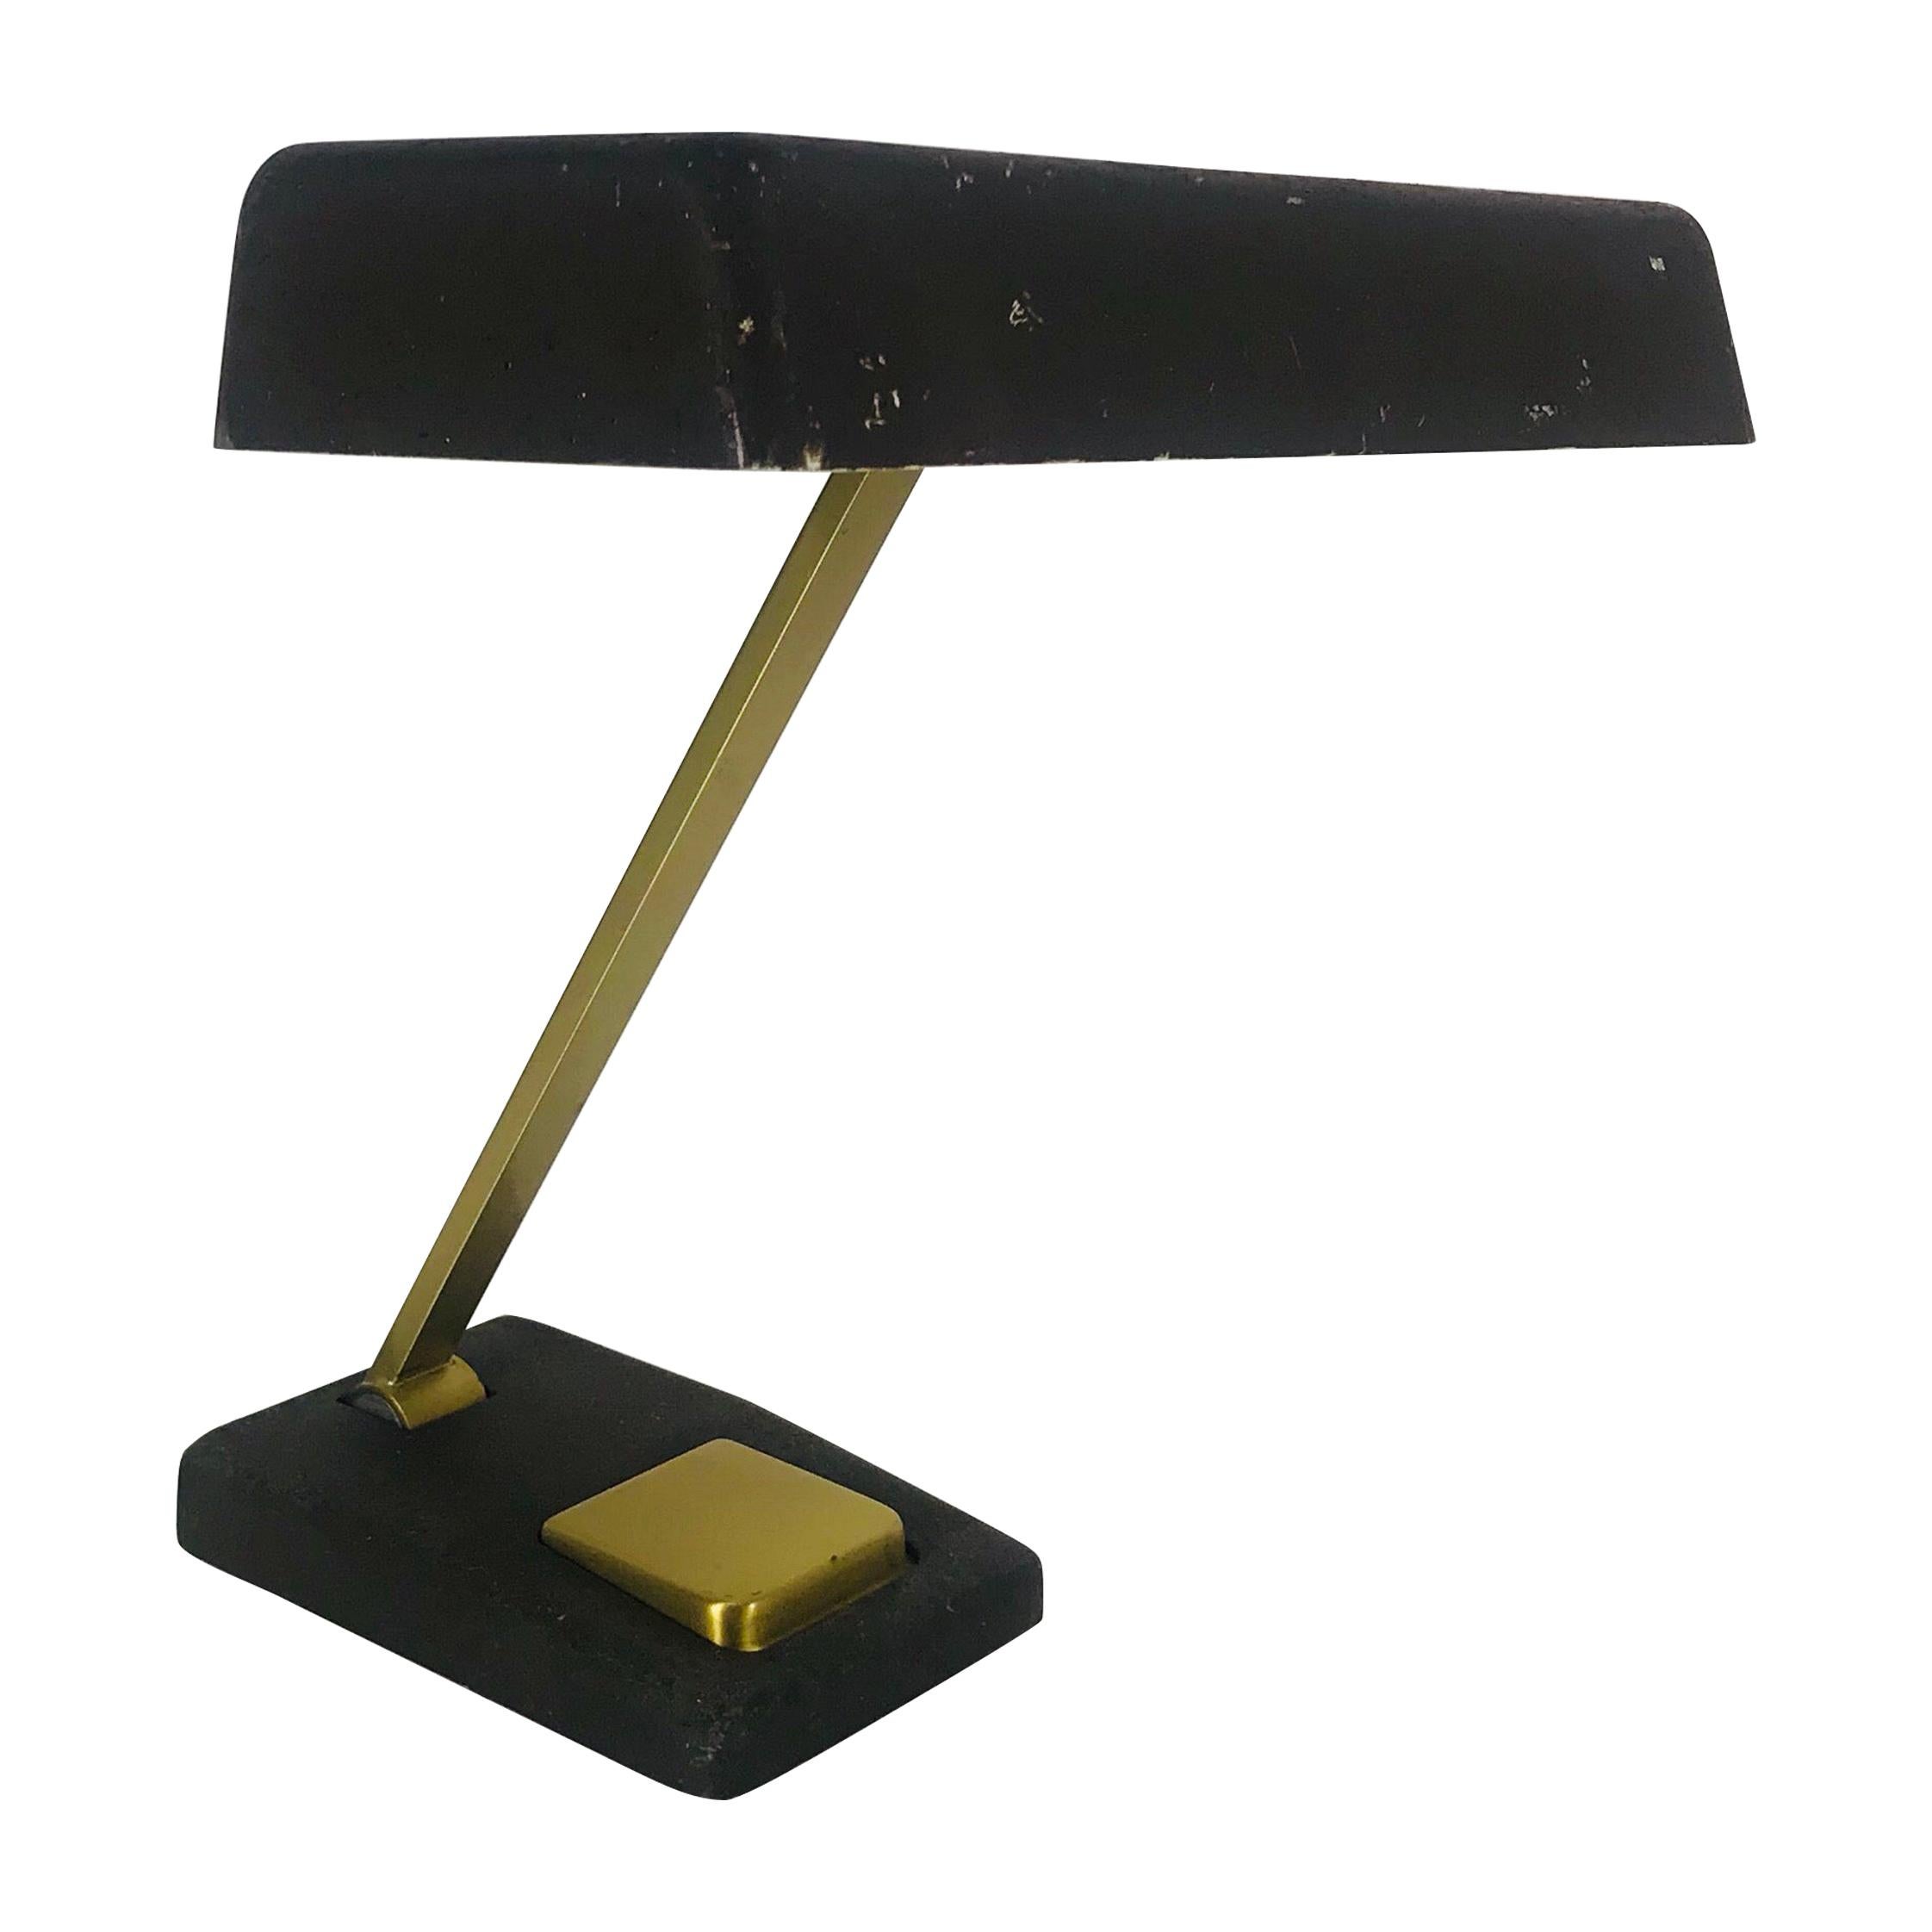 Hillebrand Midcentury Brass and Metal Table Lamp, 1960s, Germany